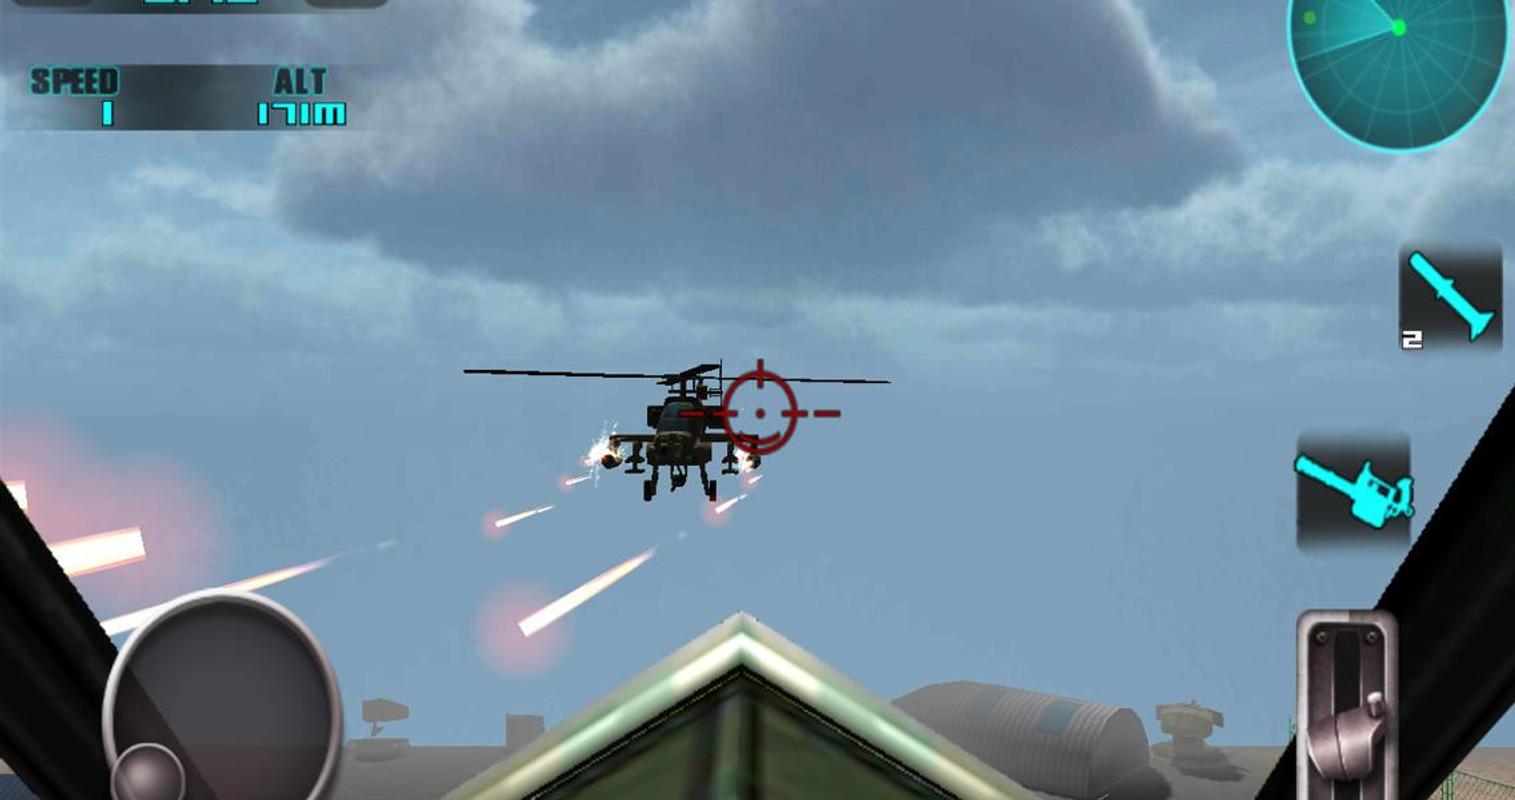 Heli battle: 3D flight game for Android - APK Download